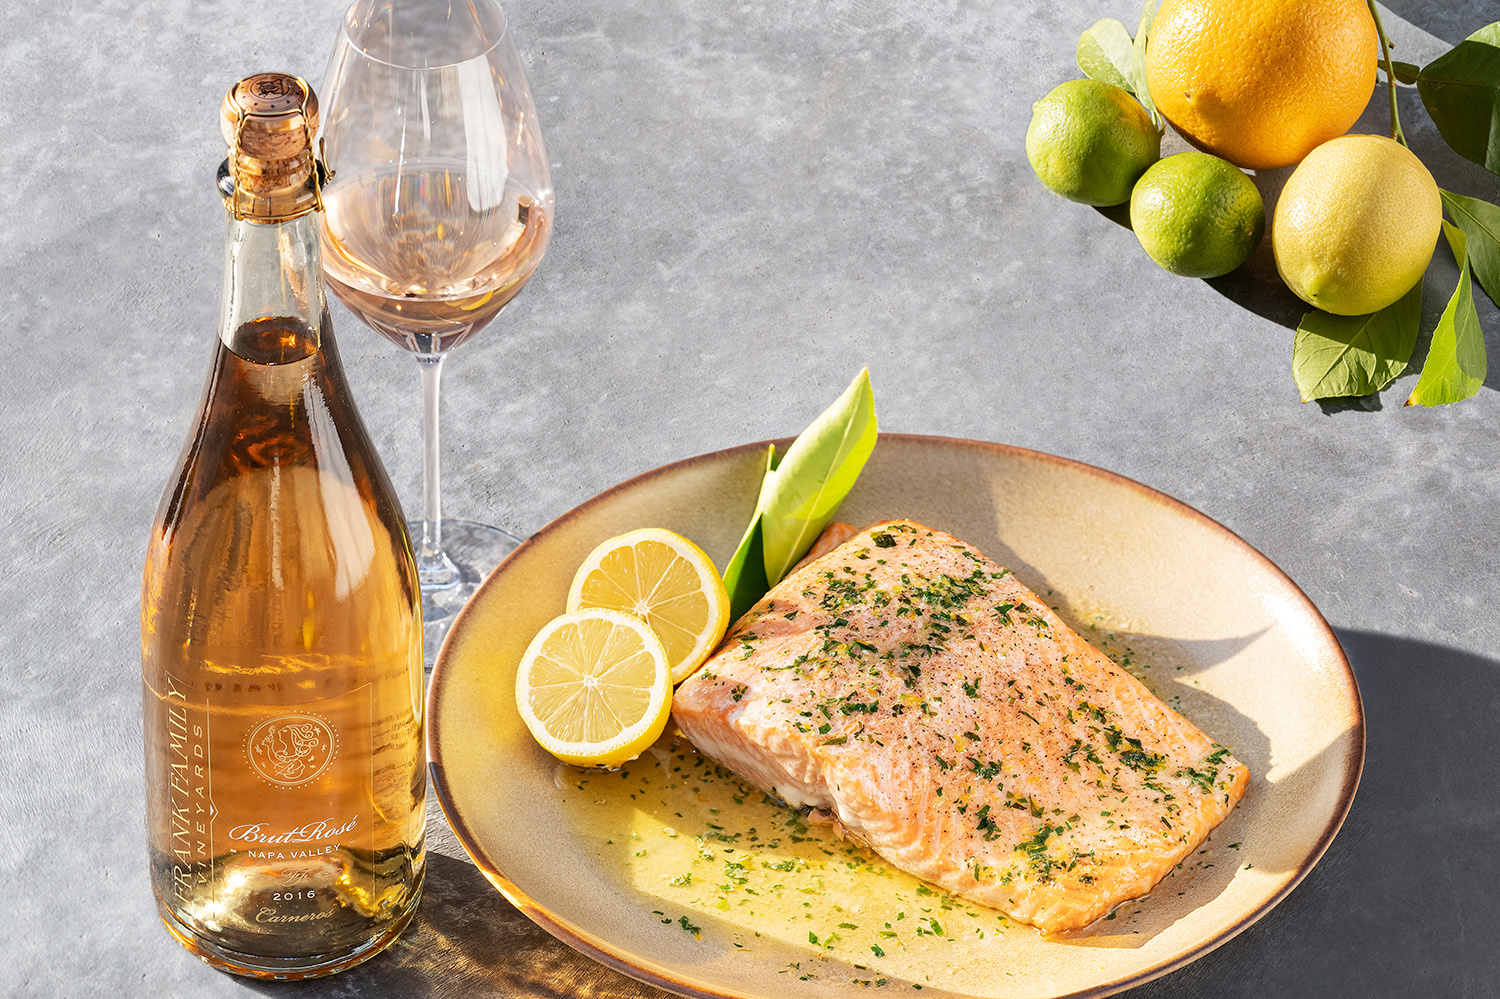 Roasted Salmon with Citrus Tarragon Butter and a bottle of Frank Family's Brut Rosé